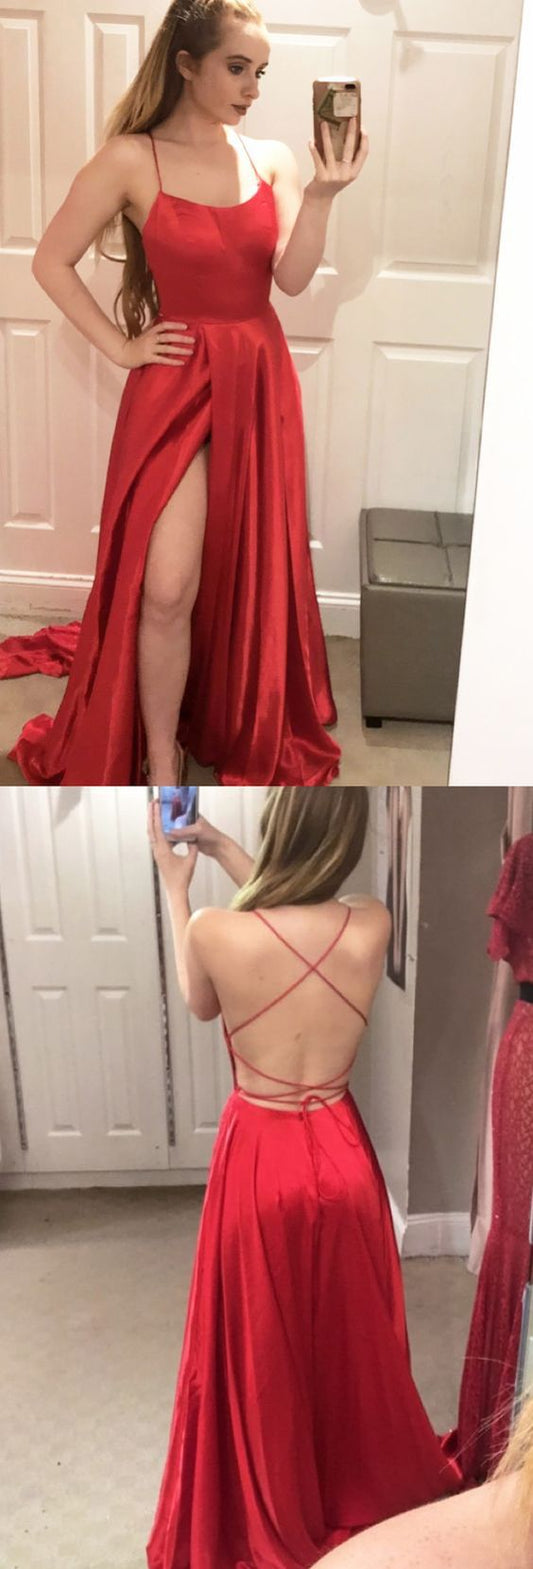 Sexy A Line Spaghetti Straps Backless Long Burgundy Satin Prom/Evening Dresses With High Split   cg14368